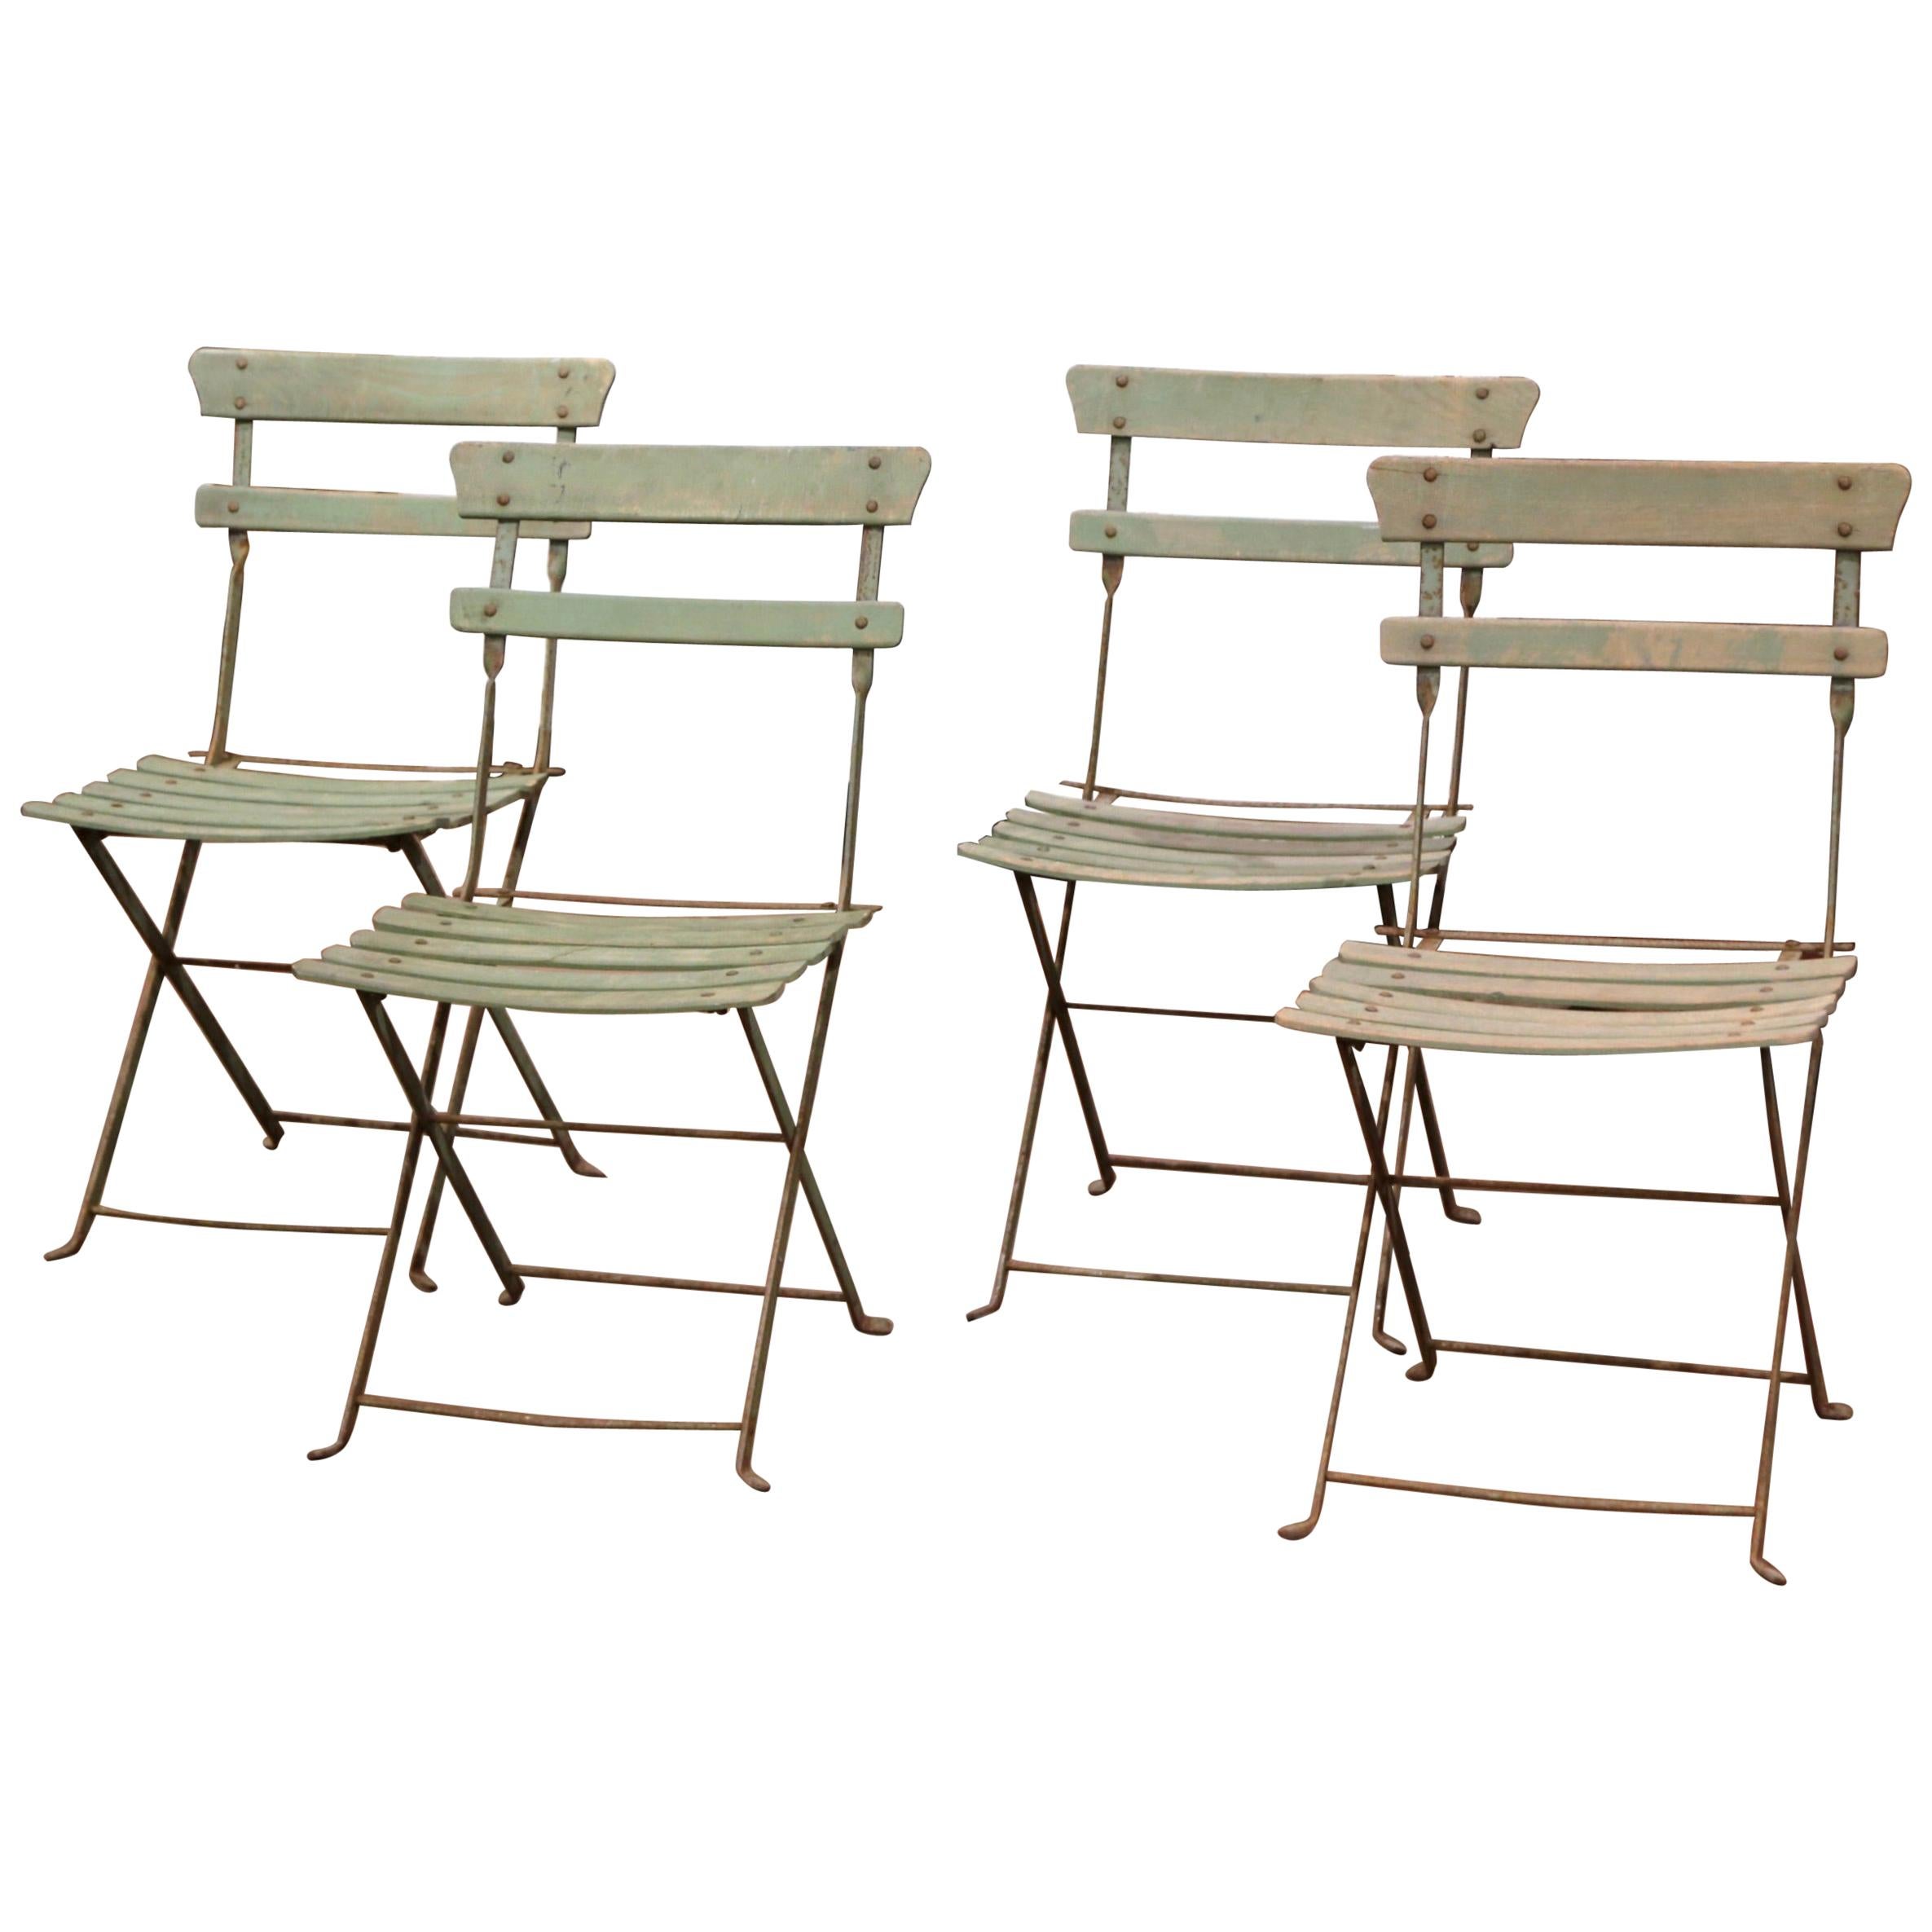 Set of Four 1920s French Iron and Wood Painted Folding Garden Chairs